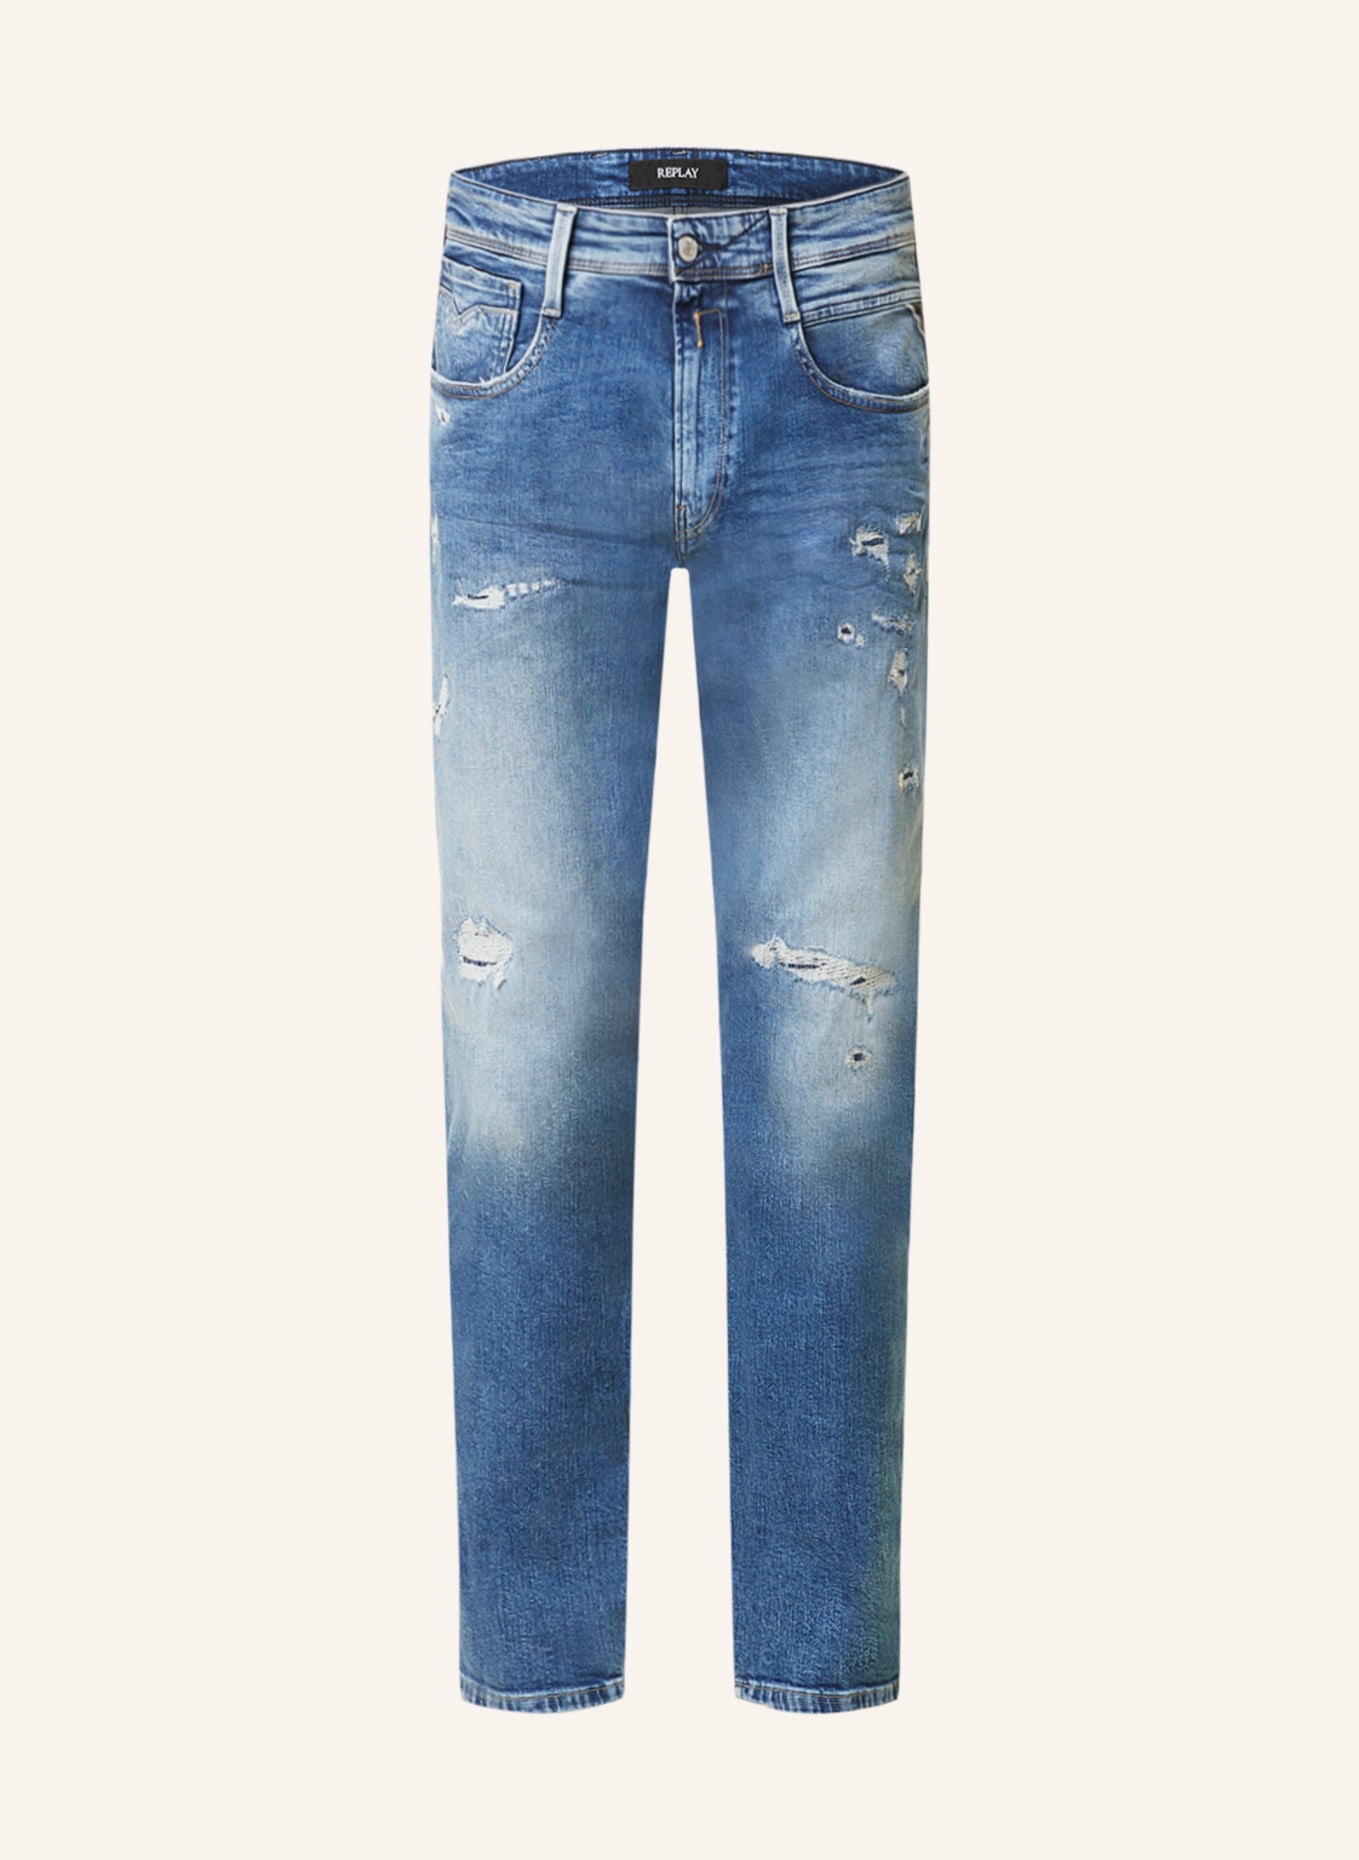 REPLAY Destroyed Jeans ANBASS Slim Fit, Farbe: 009 MEDIUM BLUE (Bild 1)